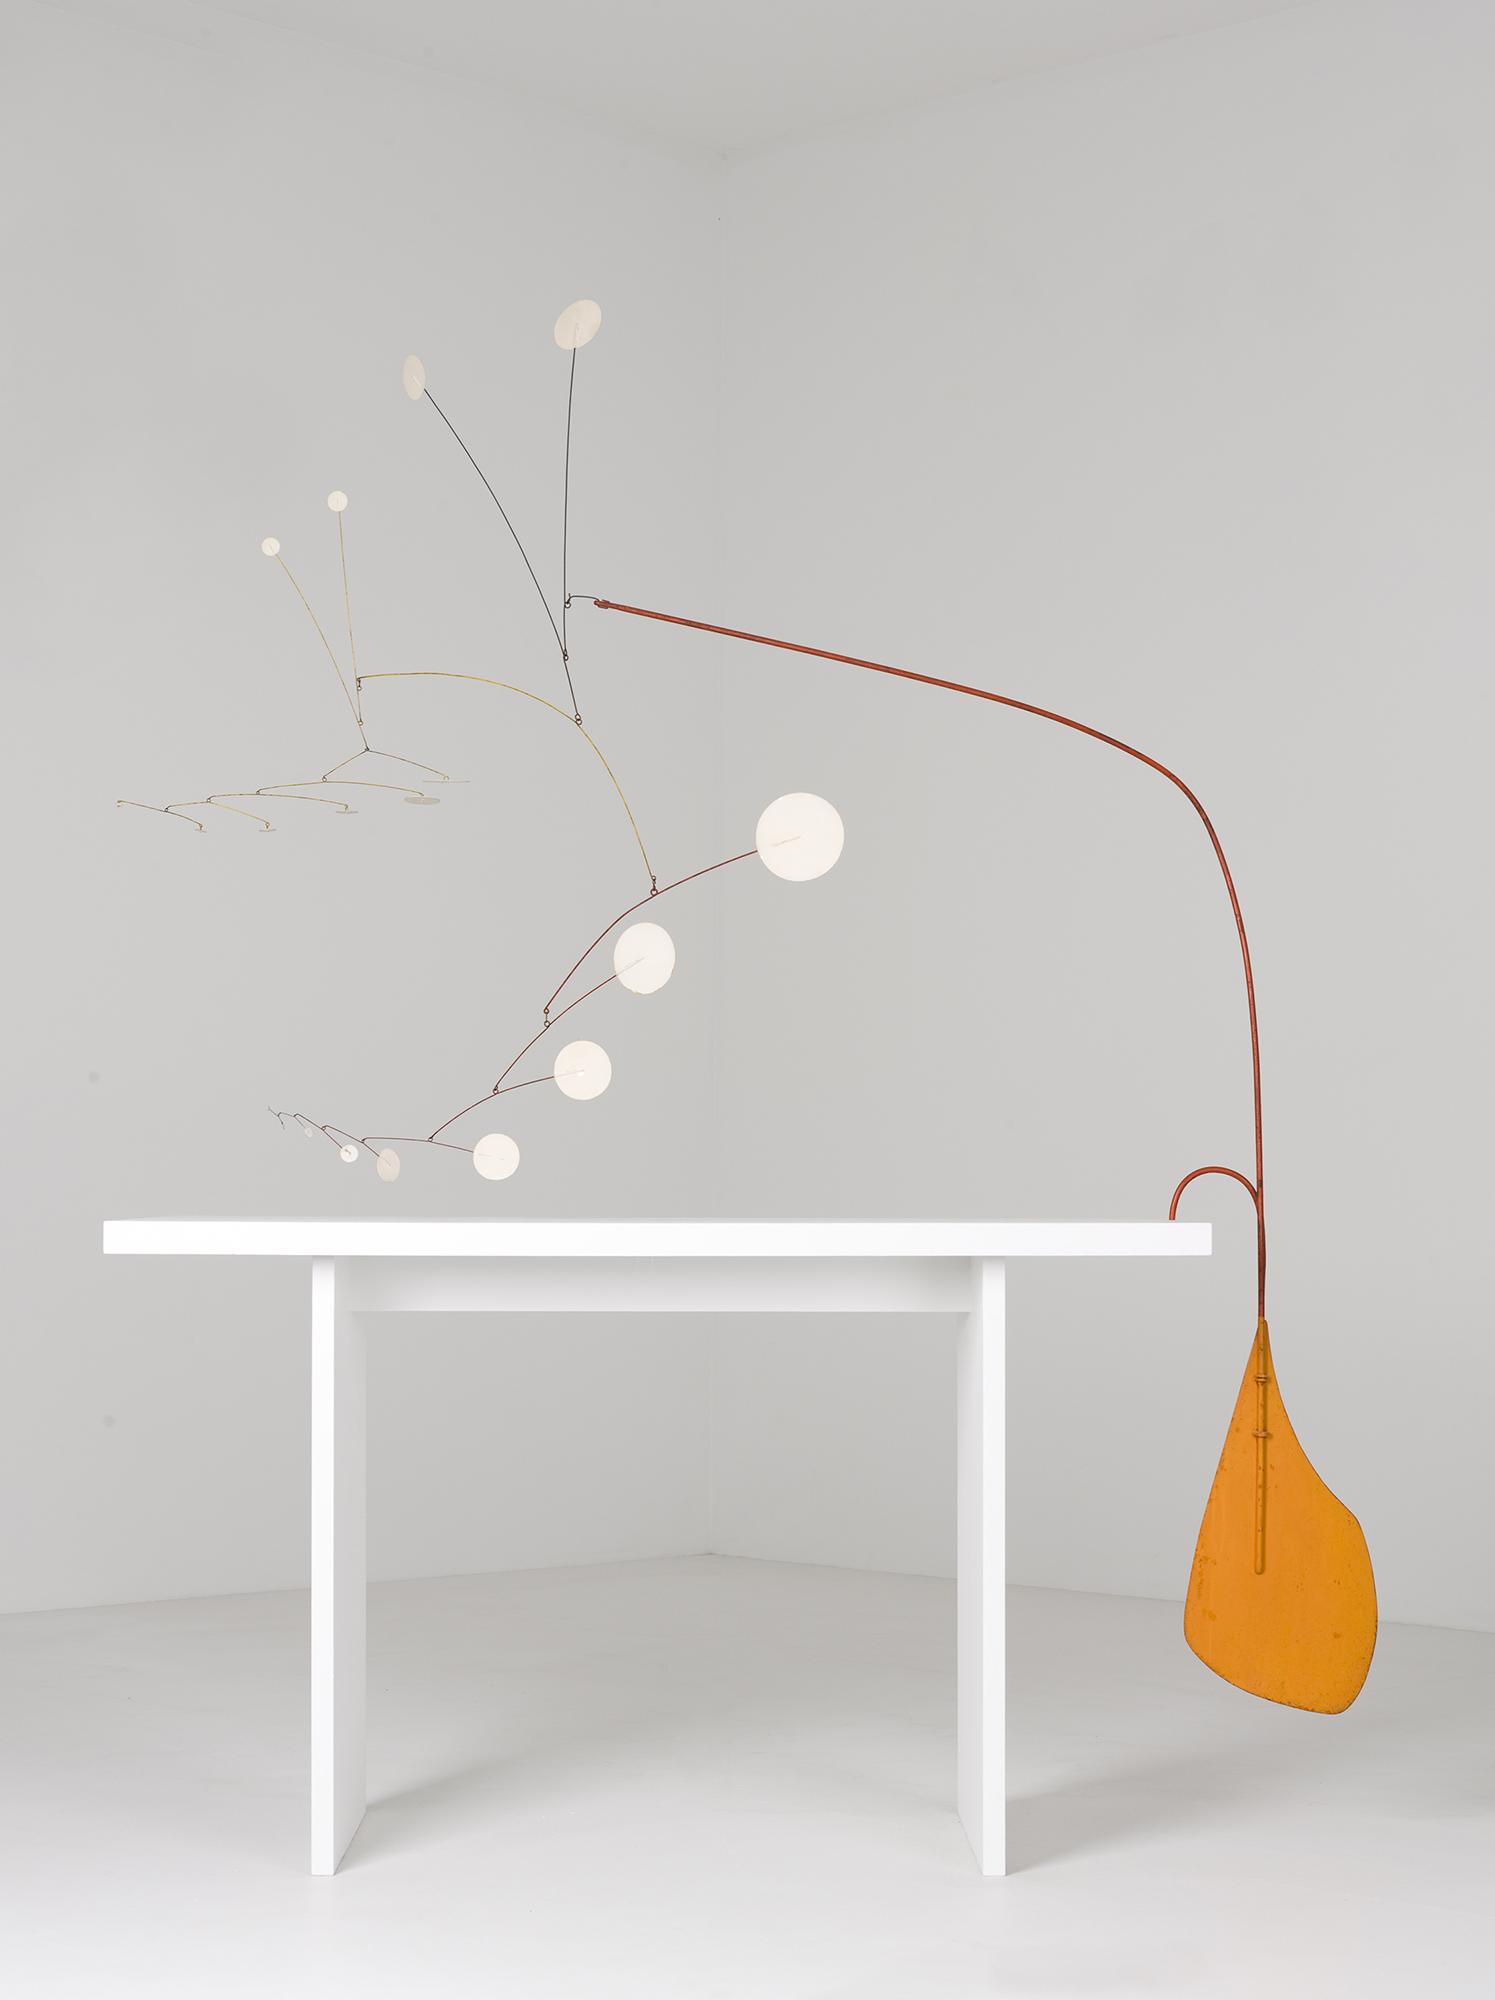 Small white circles connected by thin wire balance opposite a thicker orange wire weighted by an orange rudder-like shape hanging from the edge of a white table.